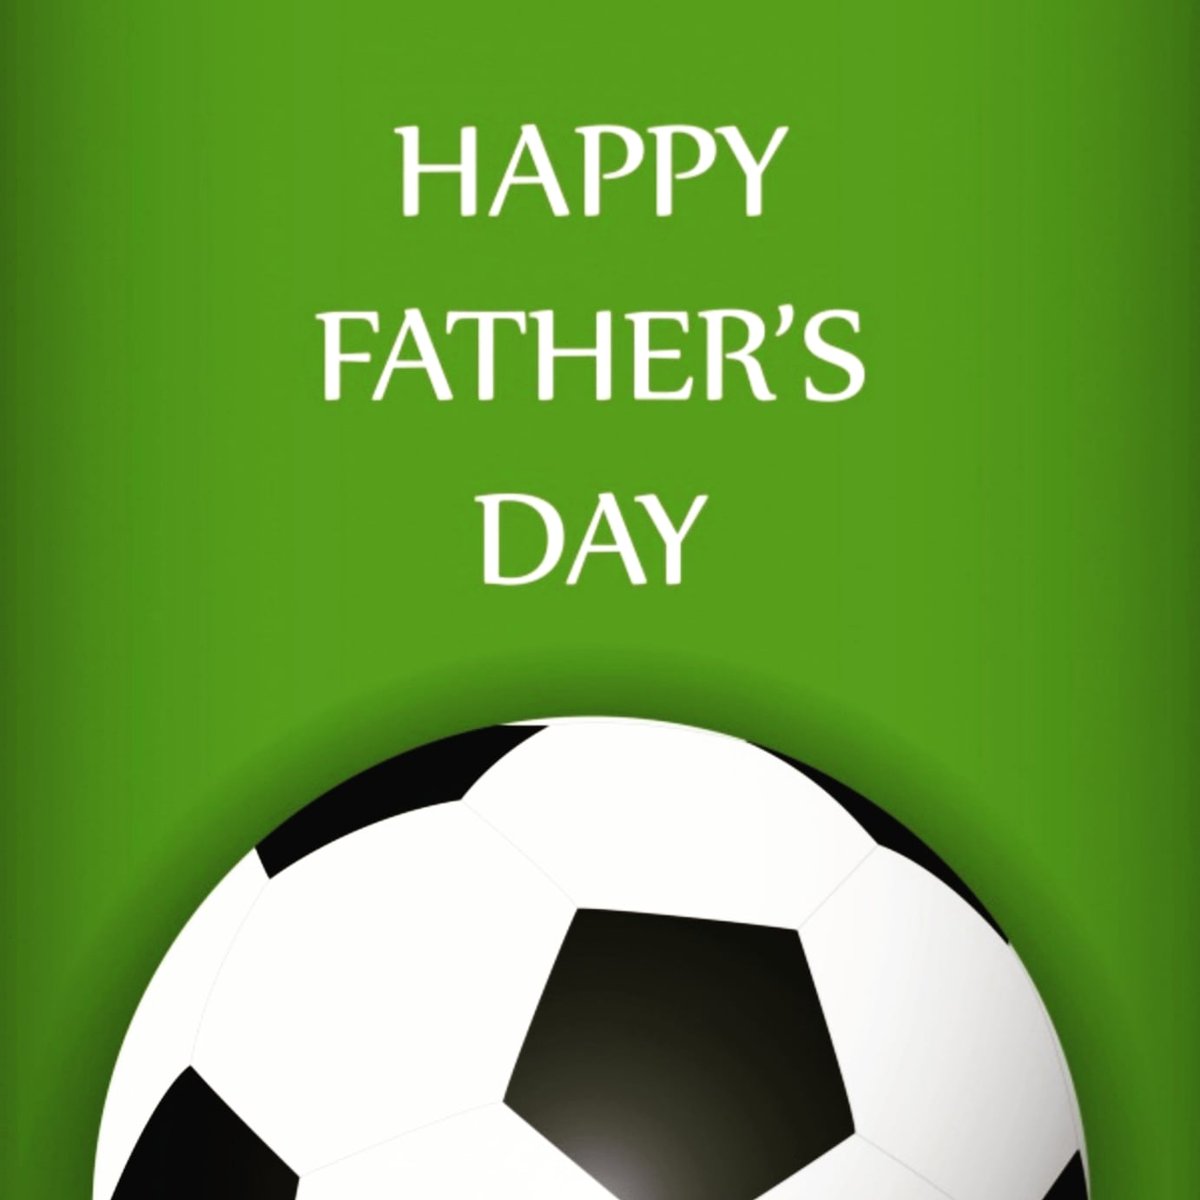 #HappyFathersDay to all our fantastic Dads & Grandads! To all our Coaches & Volunteers around the club; to all our supporters on the touchline who cheer our teams on; to all Dads & Grandads within our #GrassrootsFamily; we say Thank You for all you do. We Love You! ❤ ⚽️